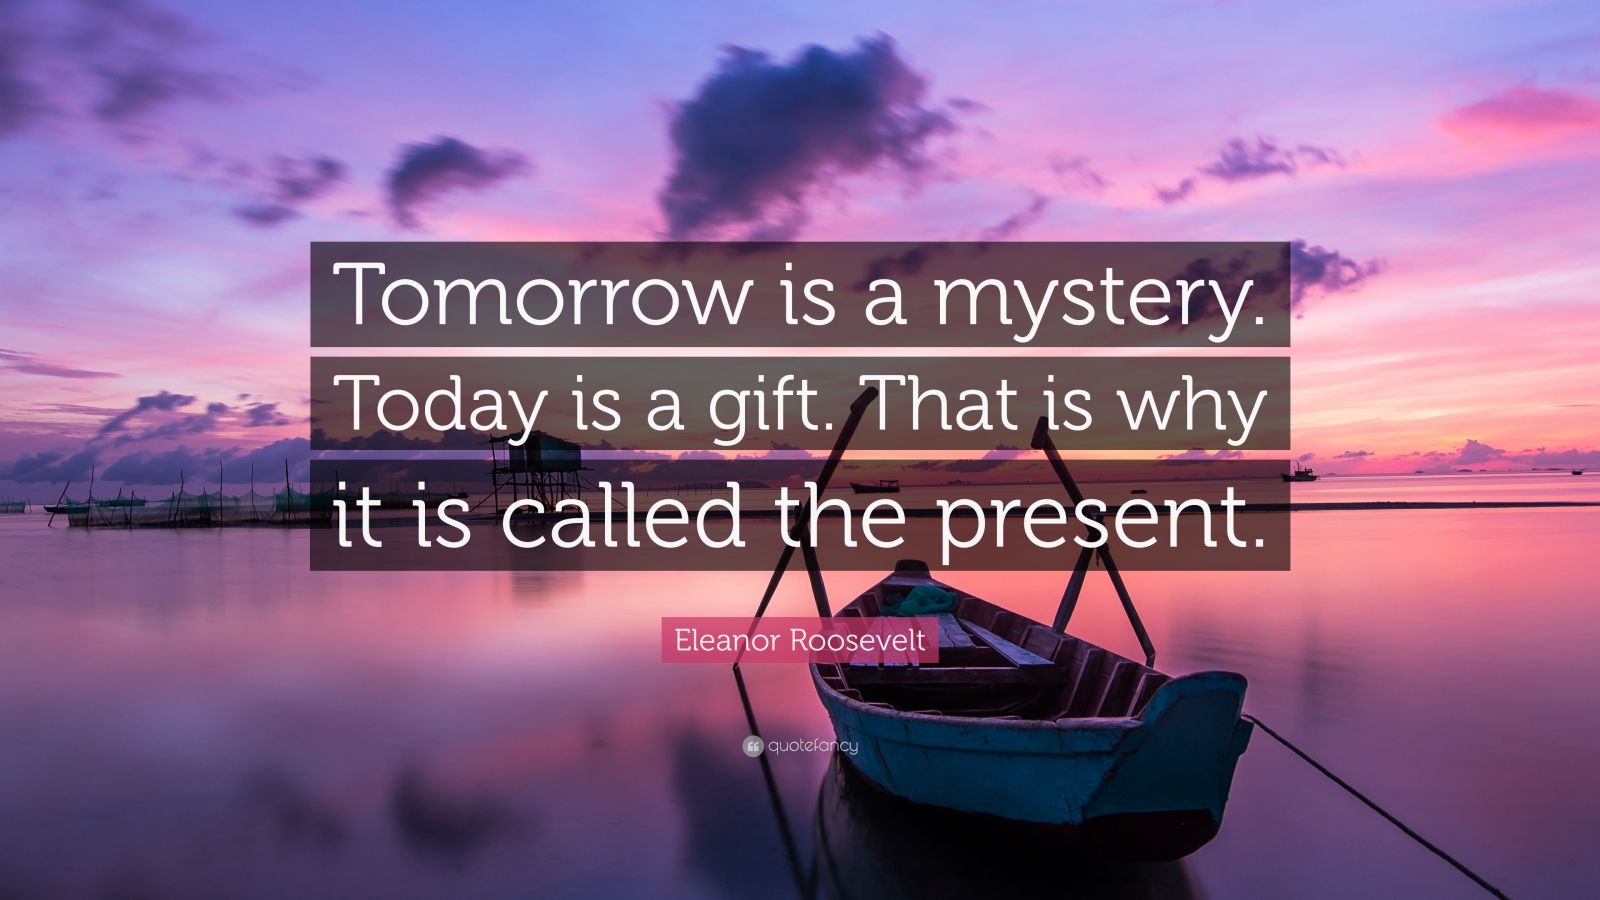 Eleanor Roosevelt Quote: “Tomorrow is a mystery. Today is a gift. That